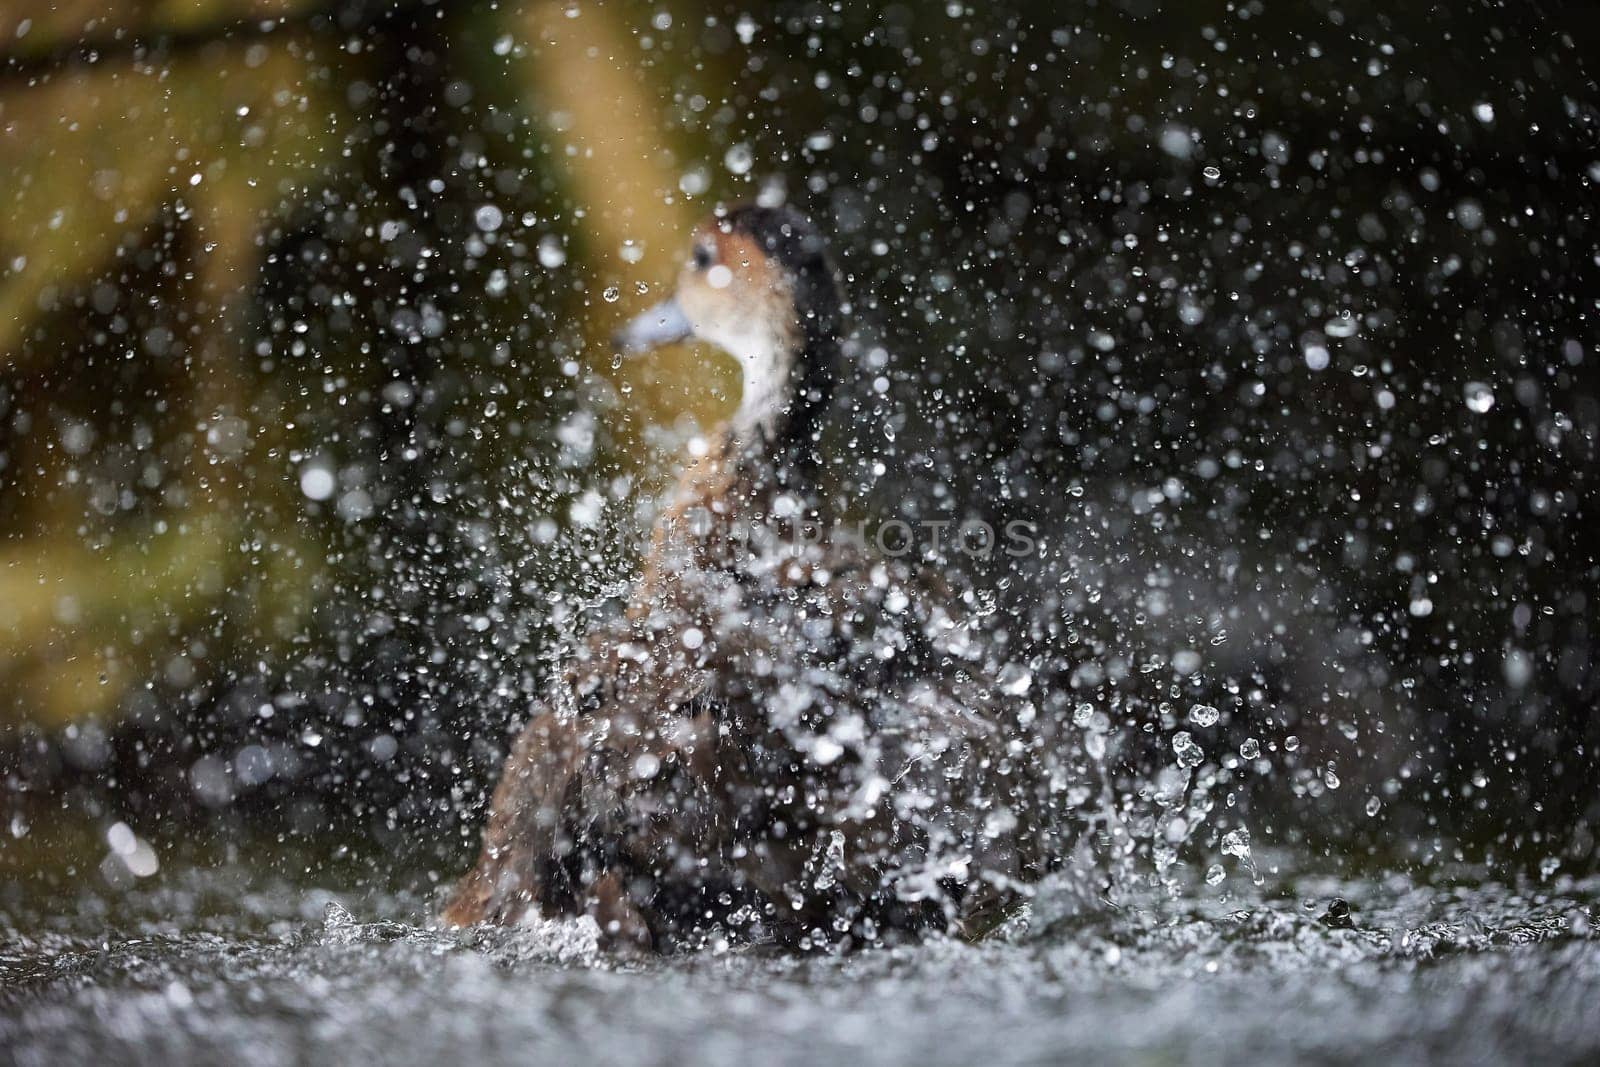 A duck bathes in a pond splashing water. Focus on drops by Viktor_Osypenko